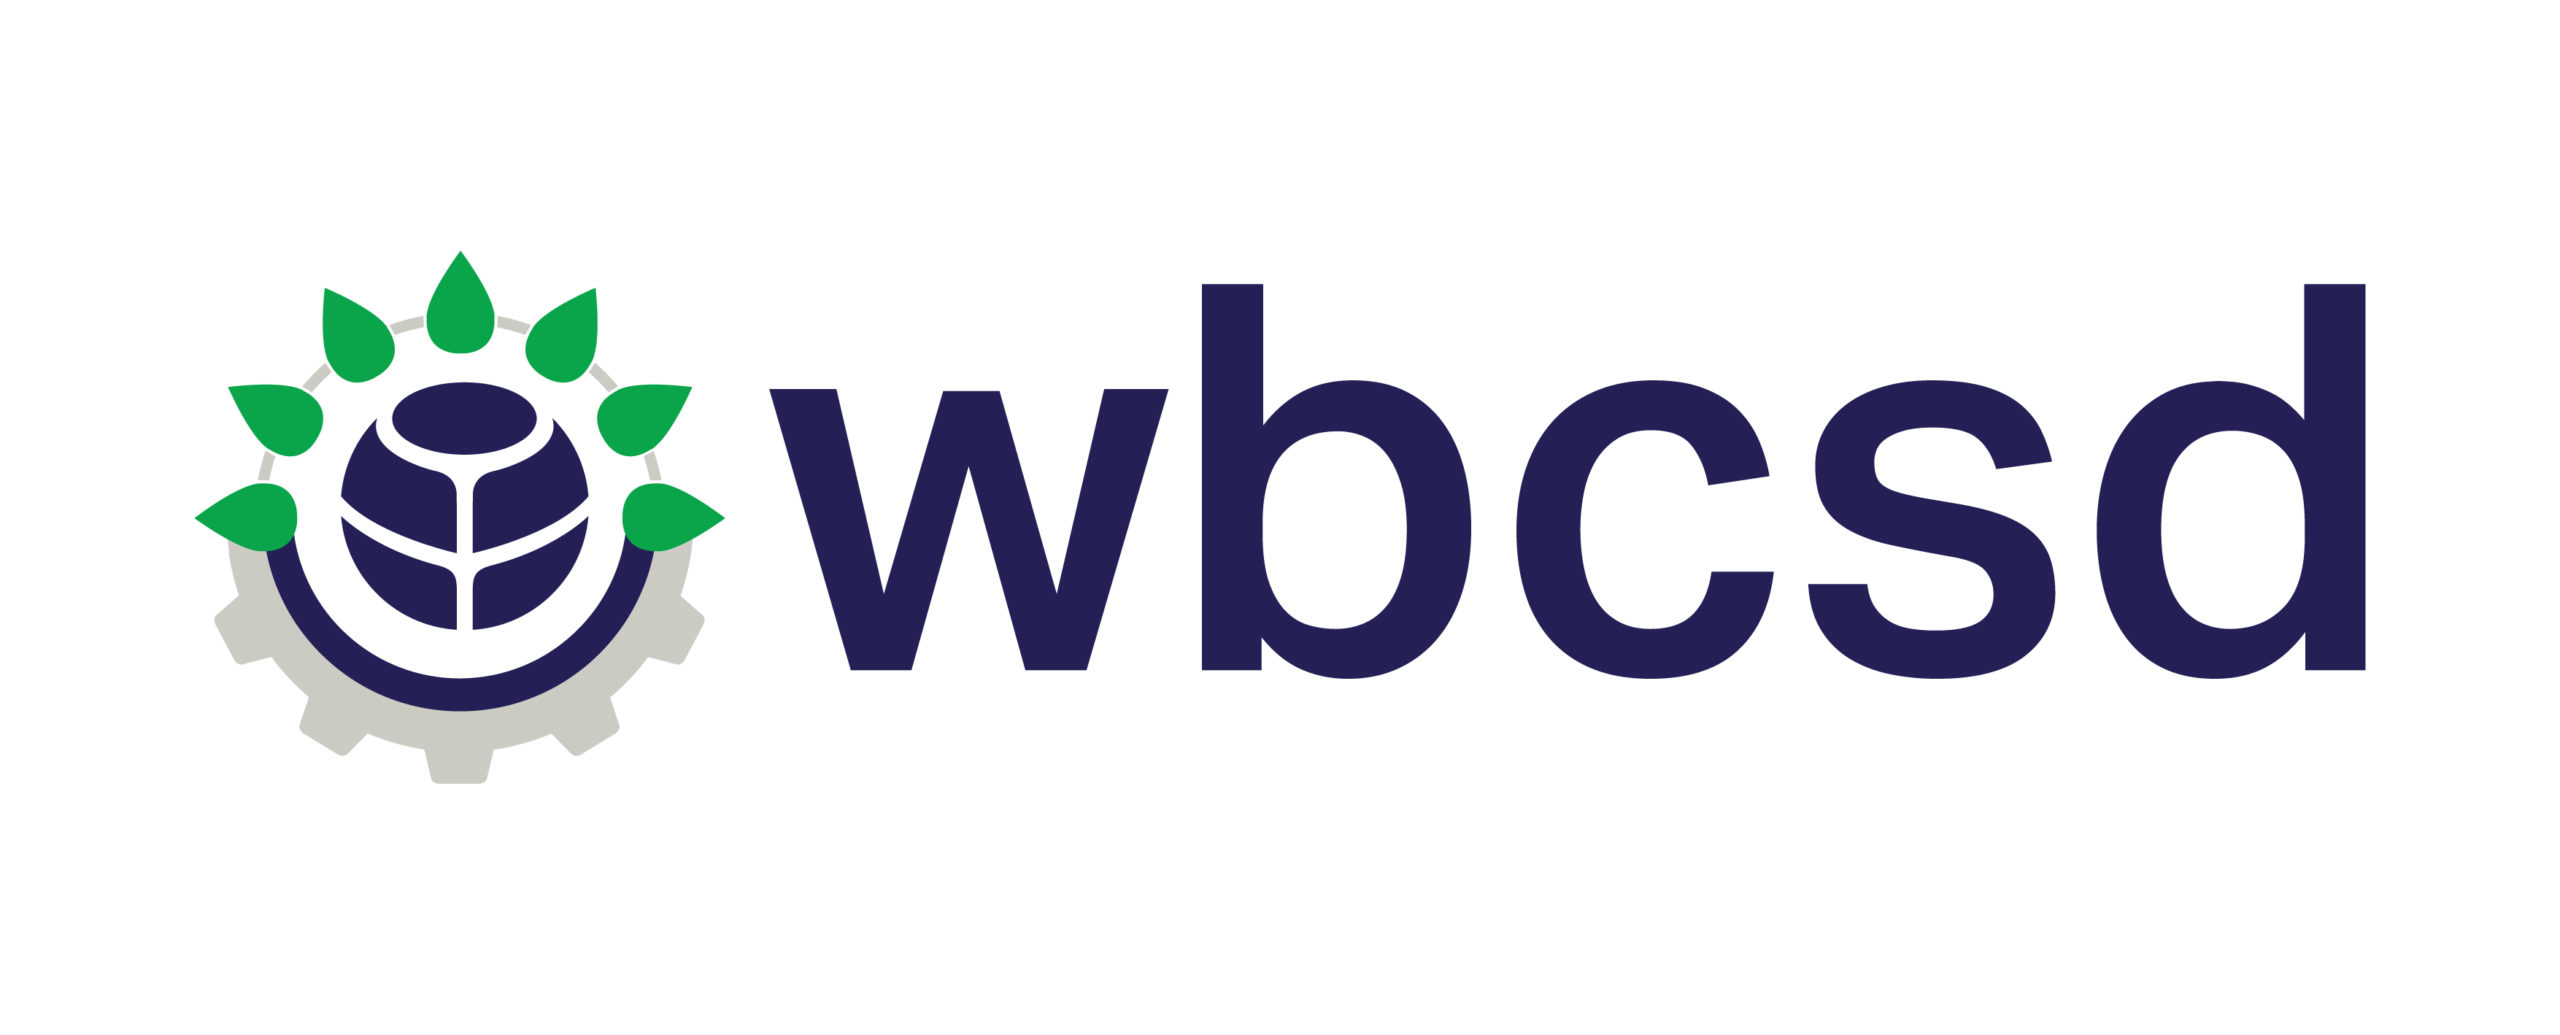 World Business Council for Sustainable Development (WBCSD) logo